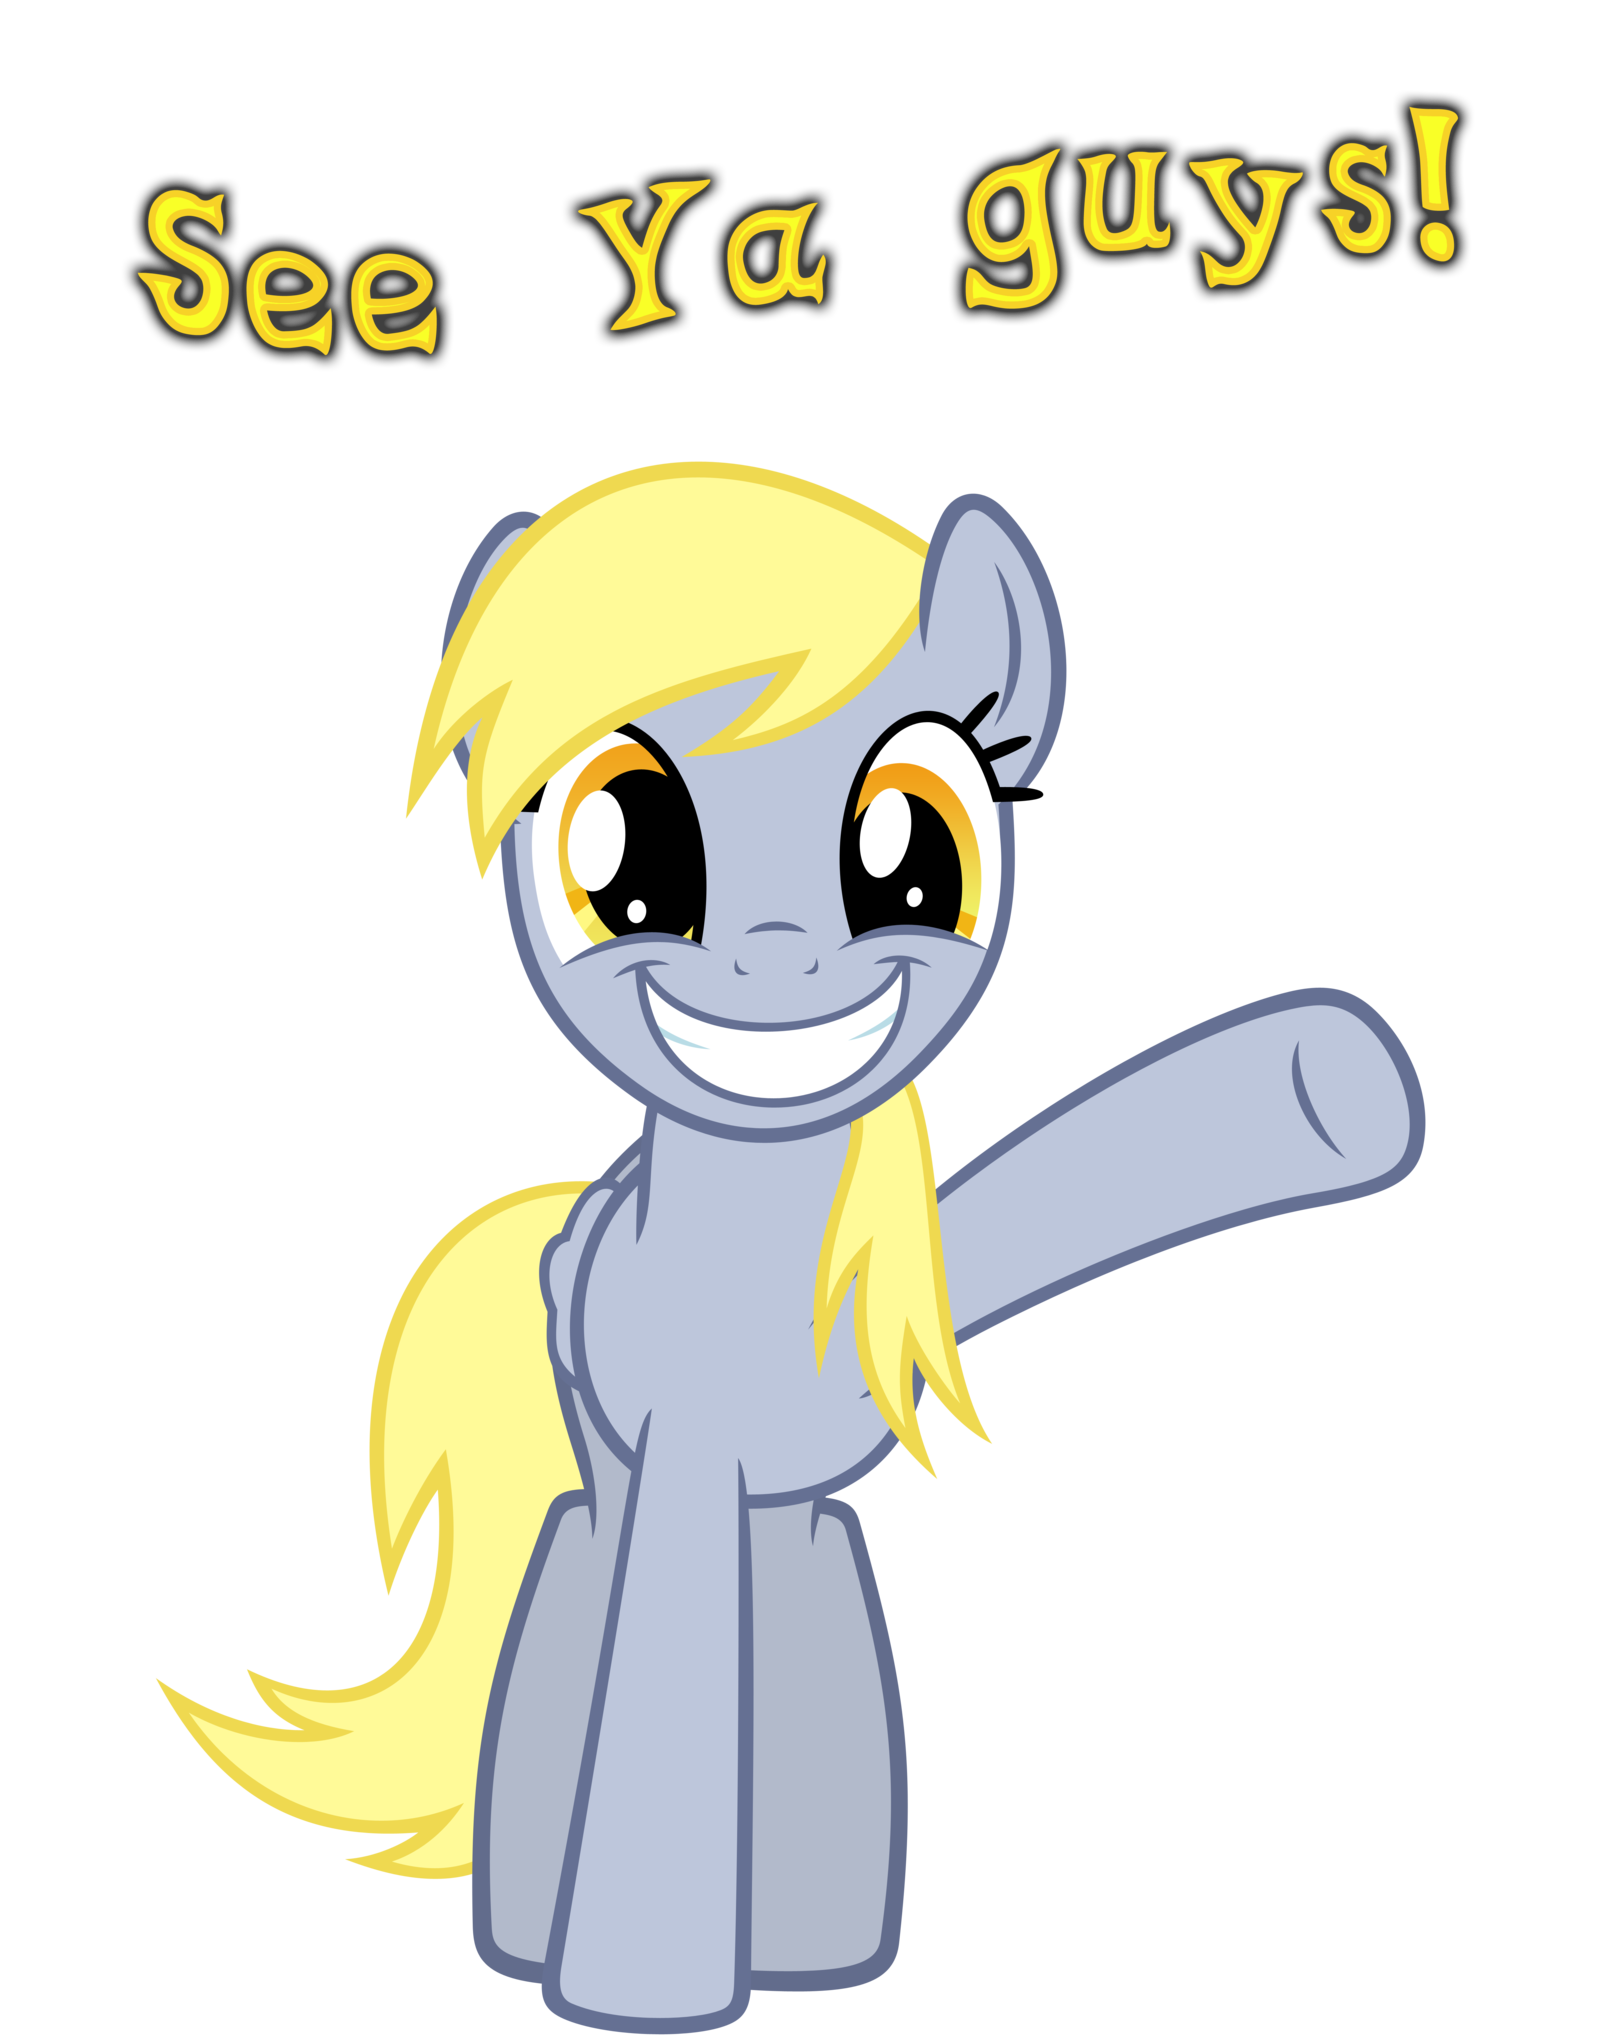 Goodbye clipart mad friend. Derpy says by derpwave